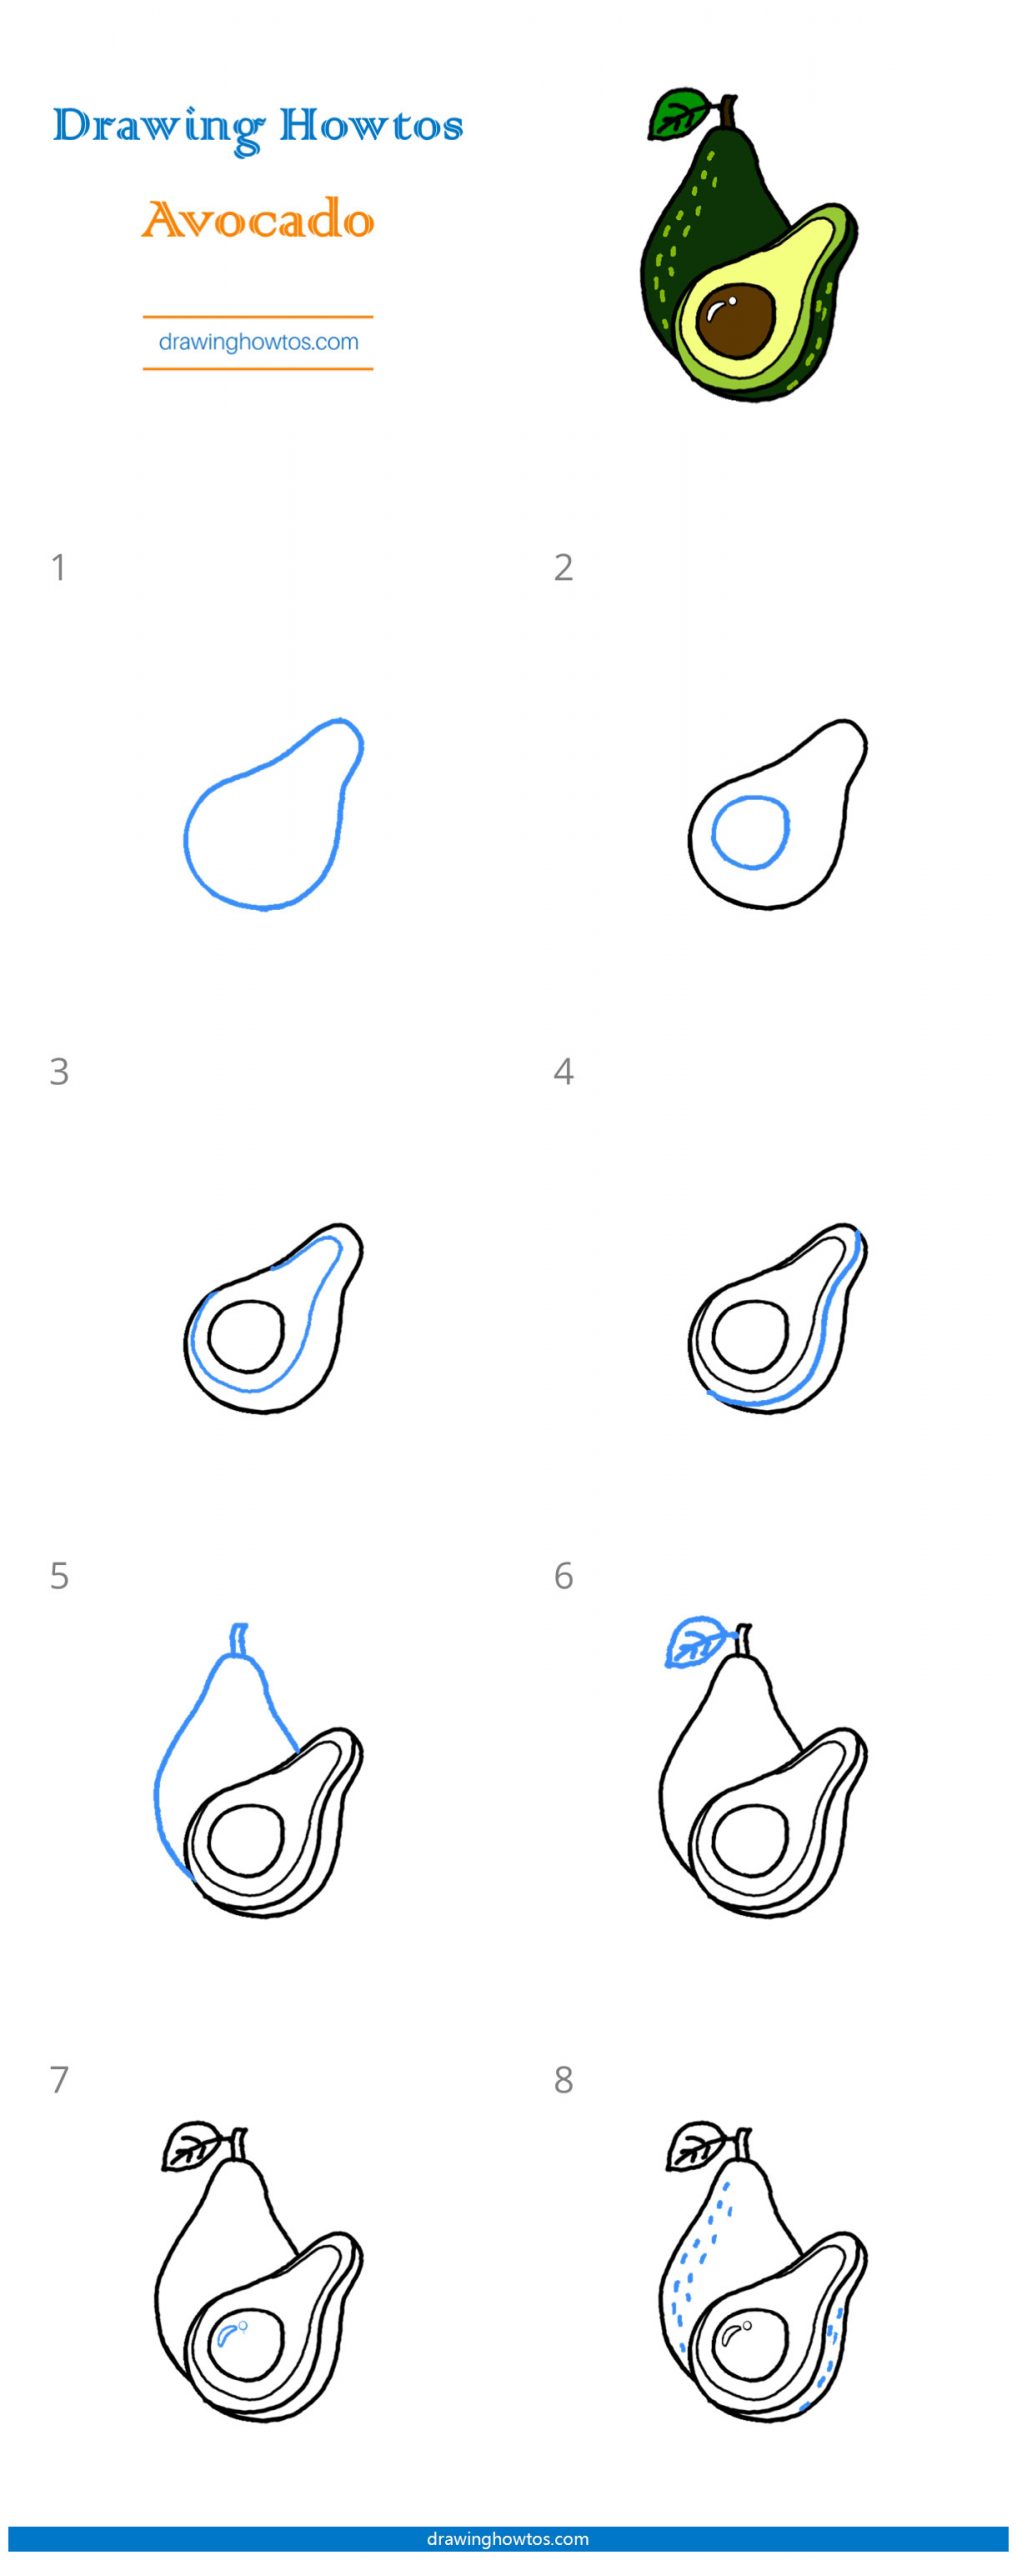 How to Draw an Avocado Step by Step